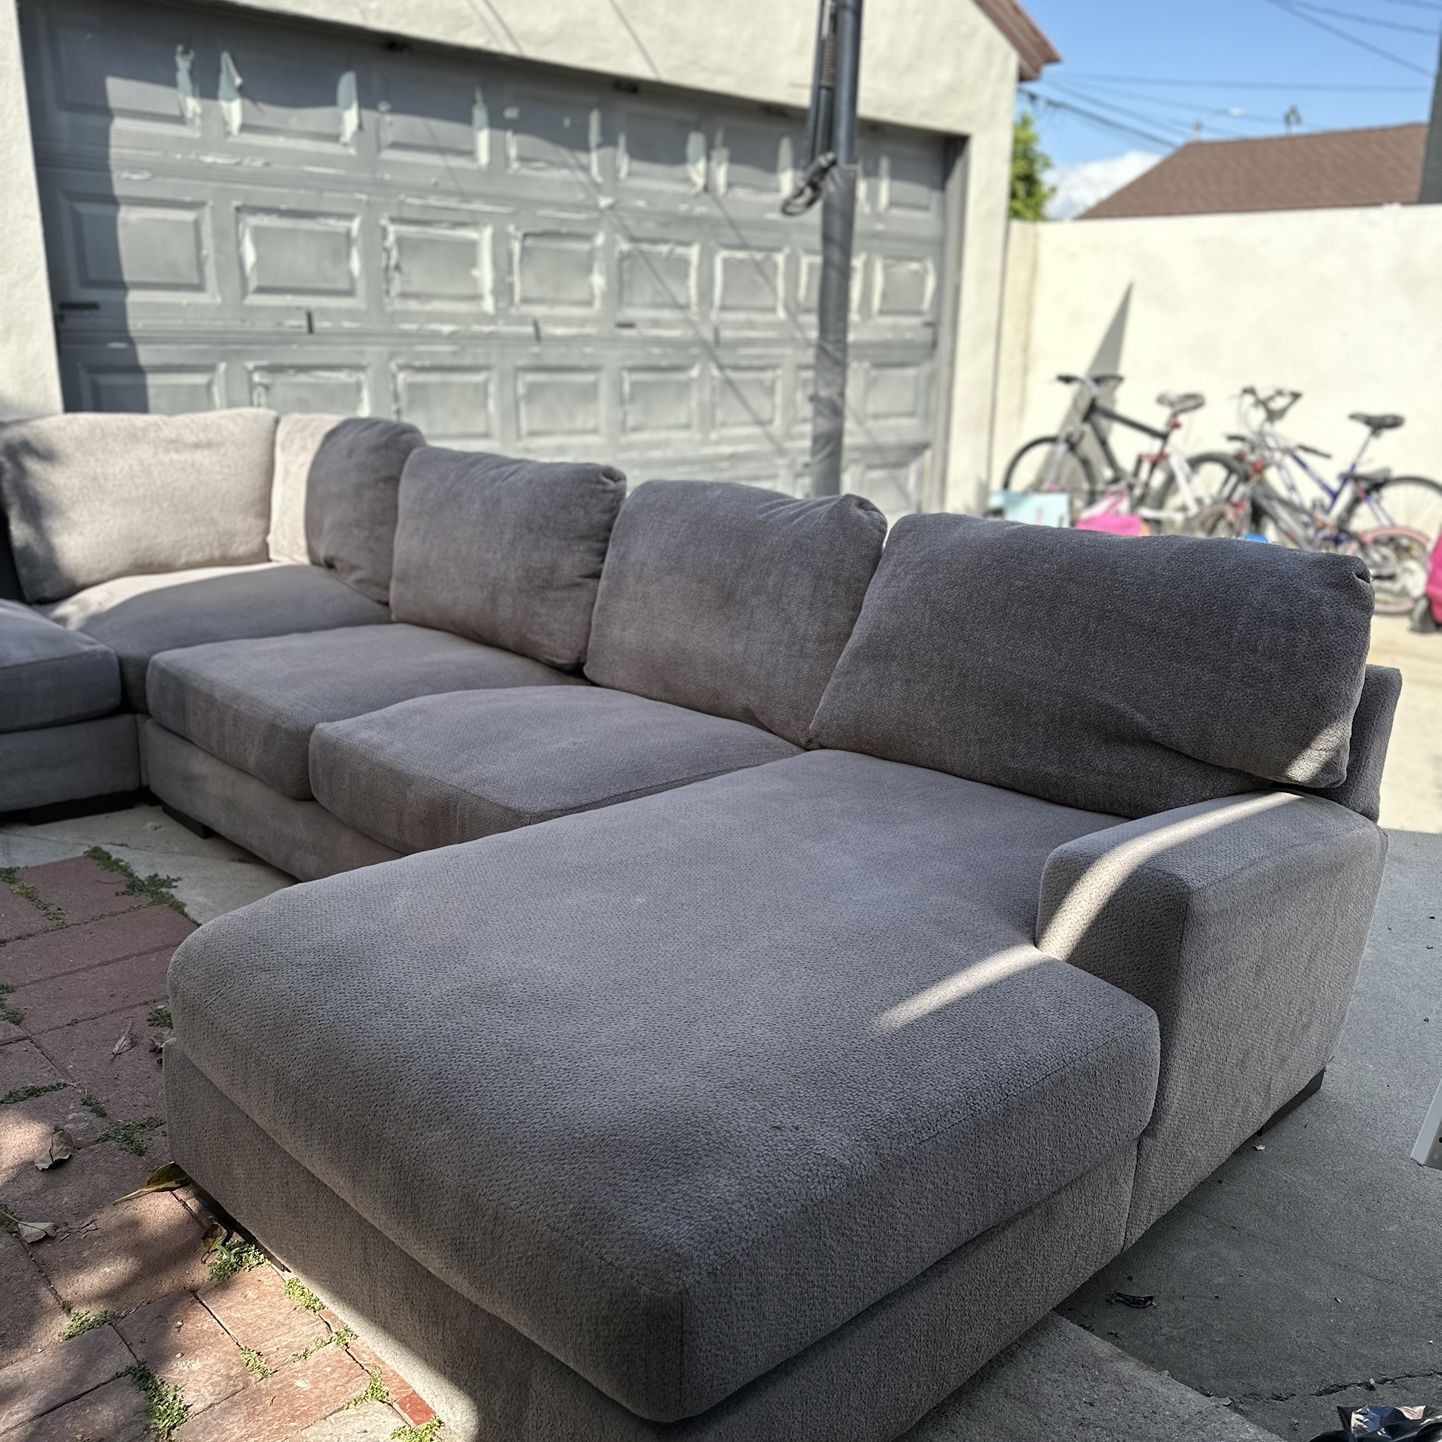 Large Couch (ASHLEYS) Sectional Sofa Grey